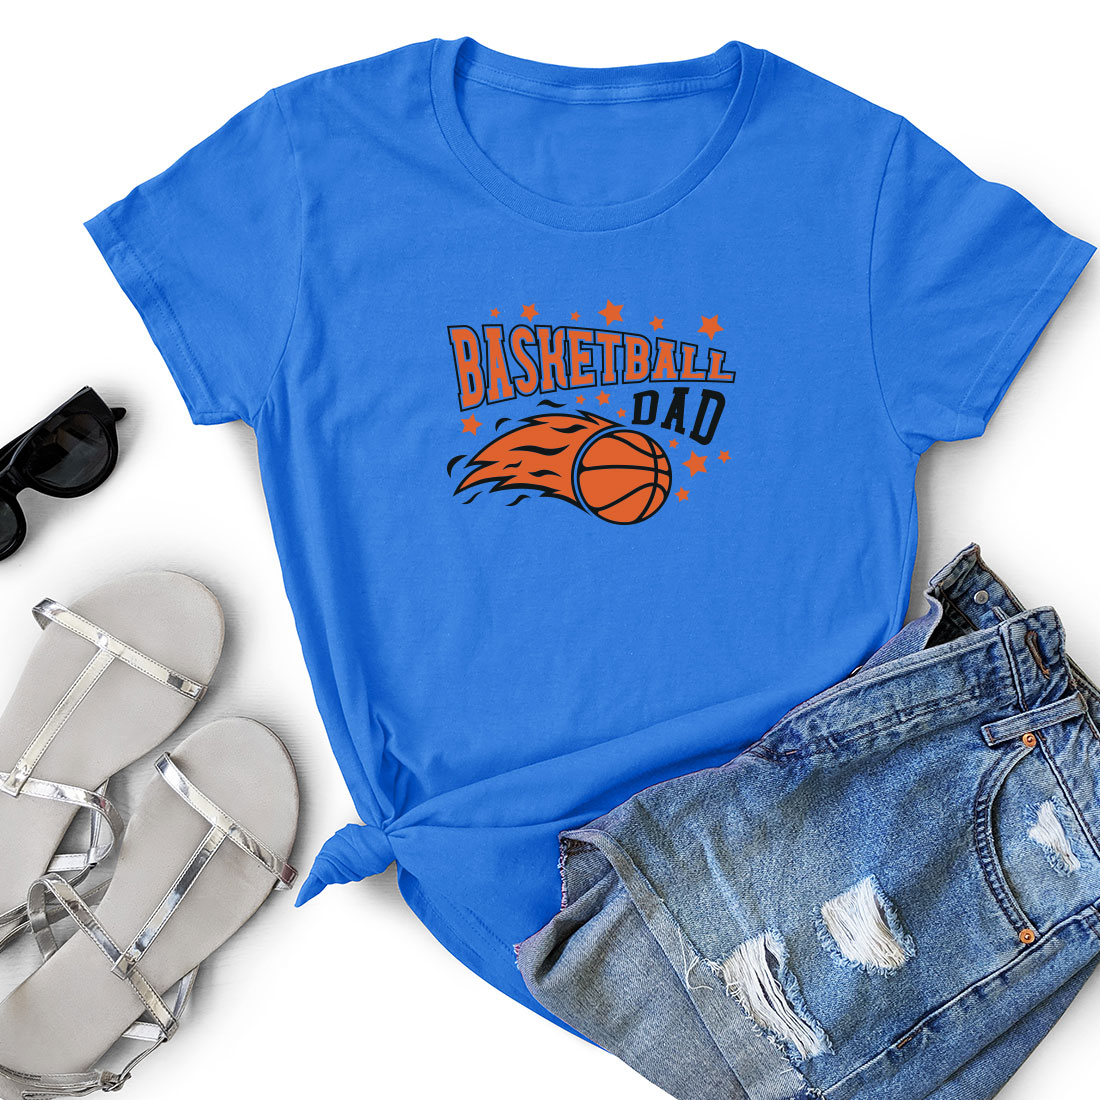 T - shirt that says basketball dad with a basketball on it.